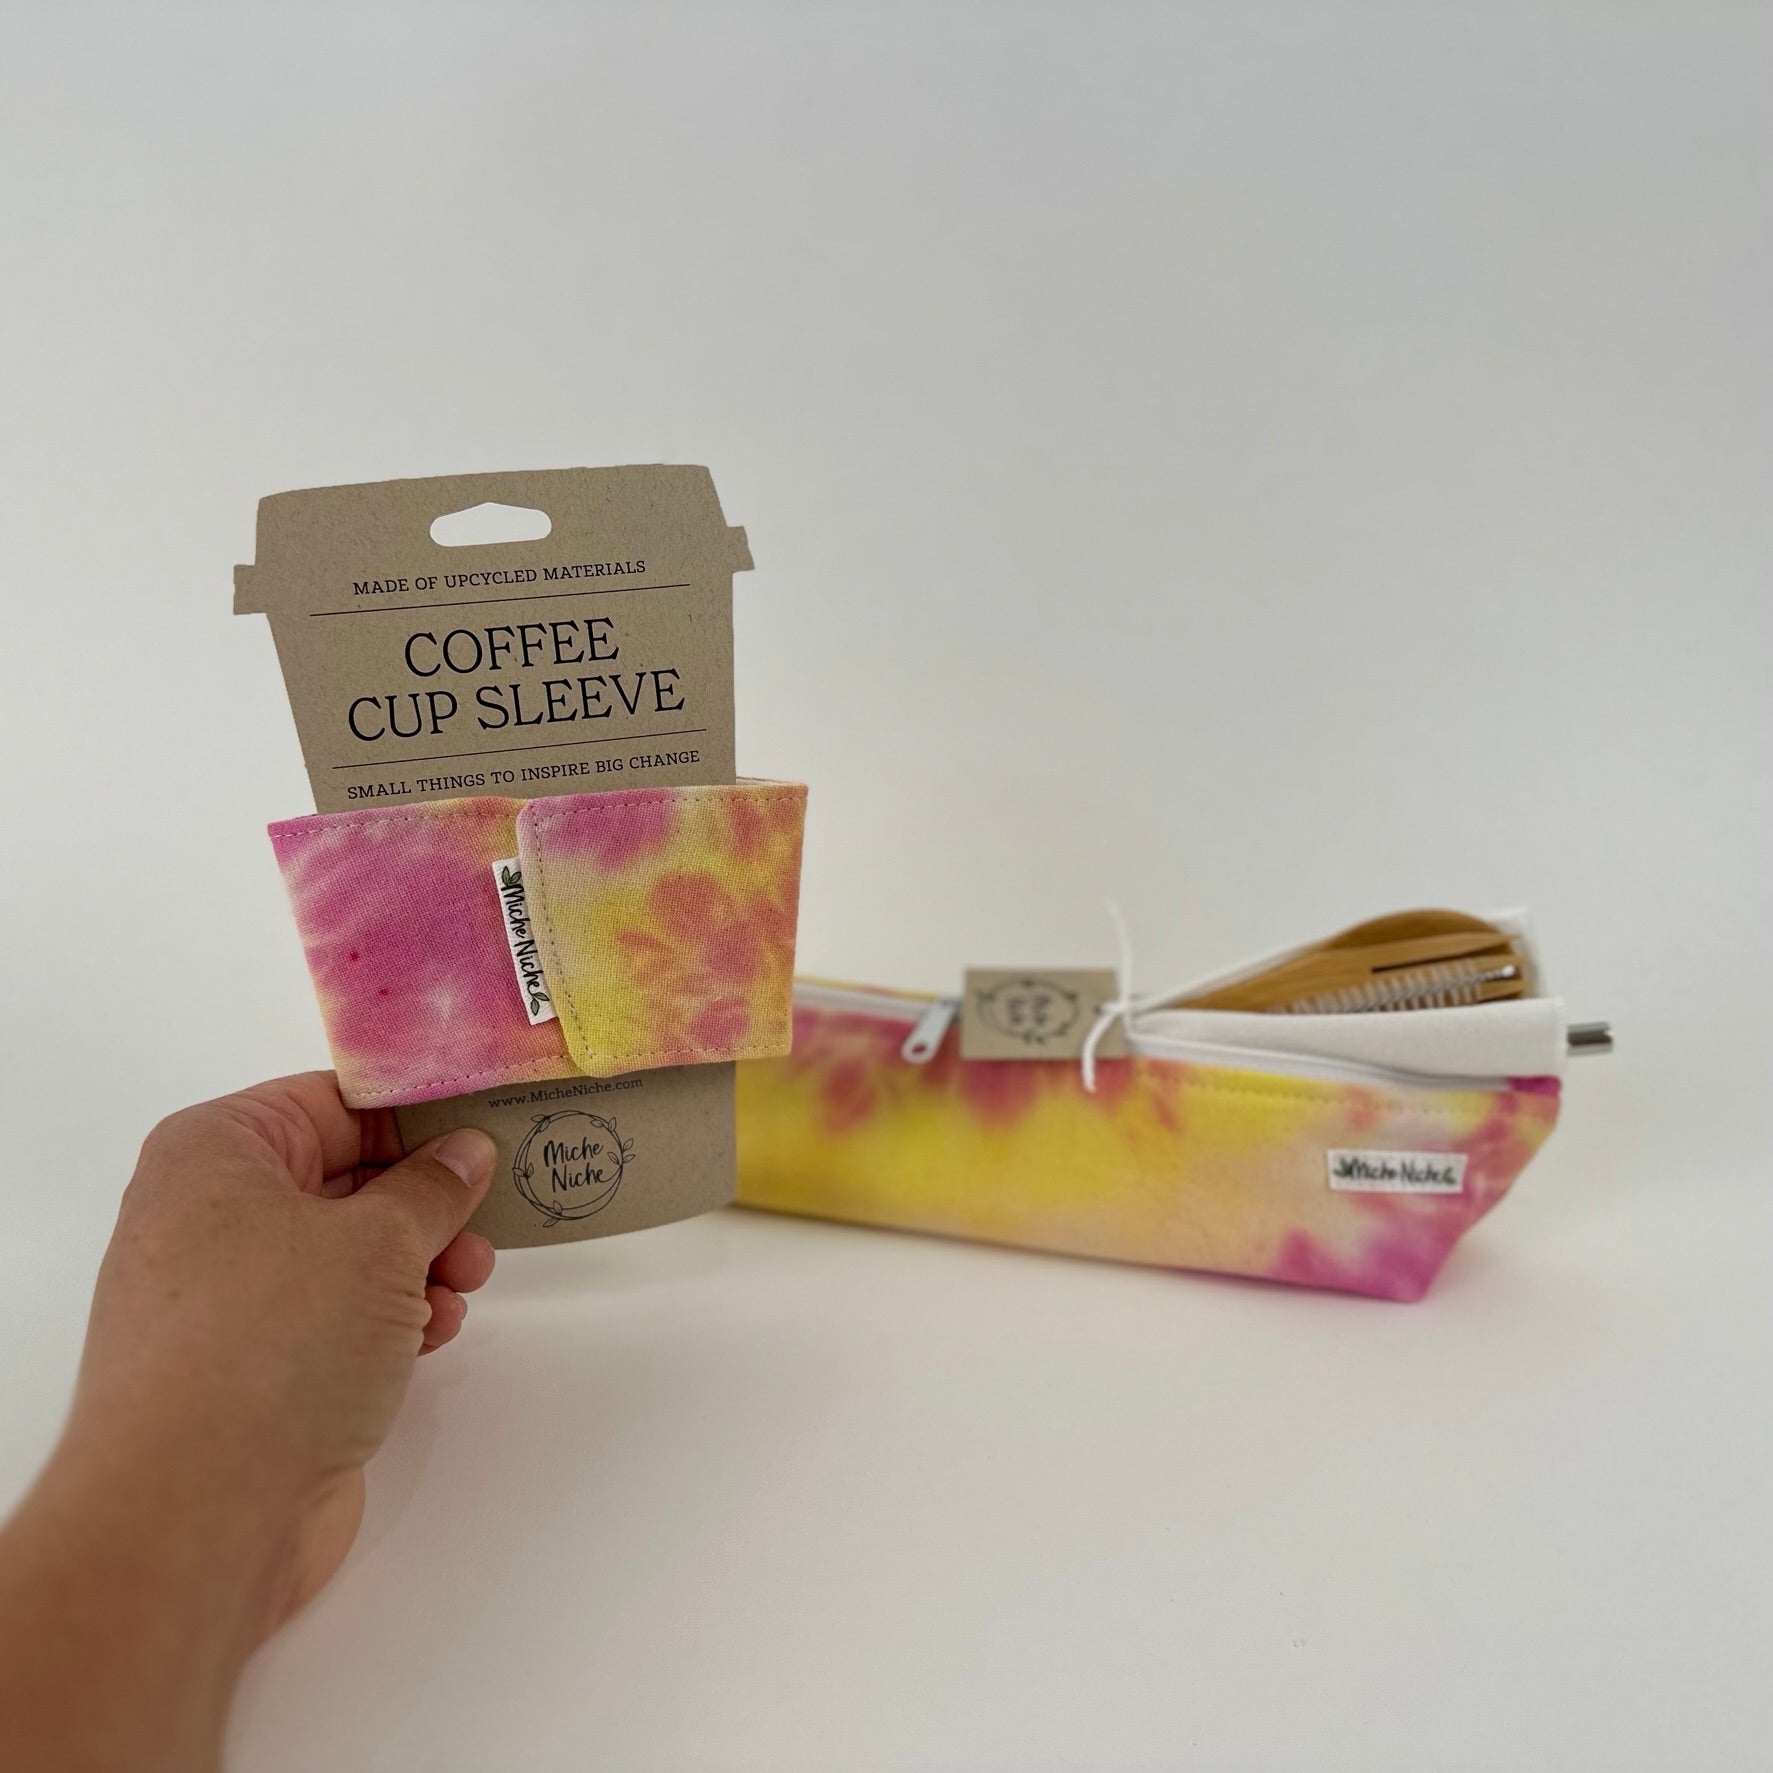 Matching set of Miche Niche coffee cup sleeve and zipper pouch in a hand dyed tie due pattern of pink, yellow, and fuchsia